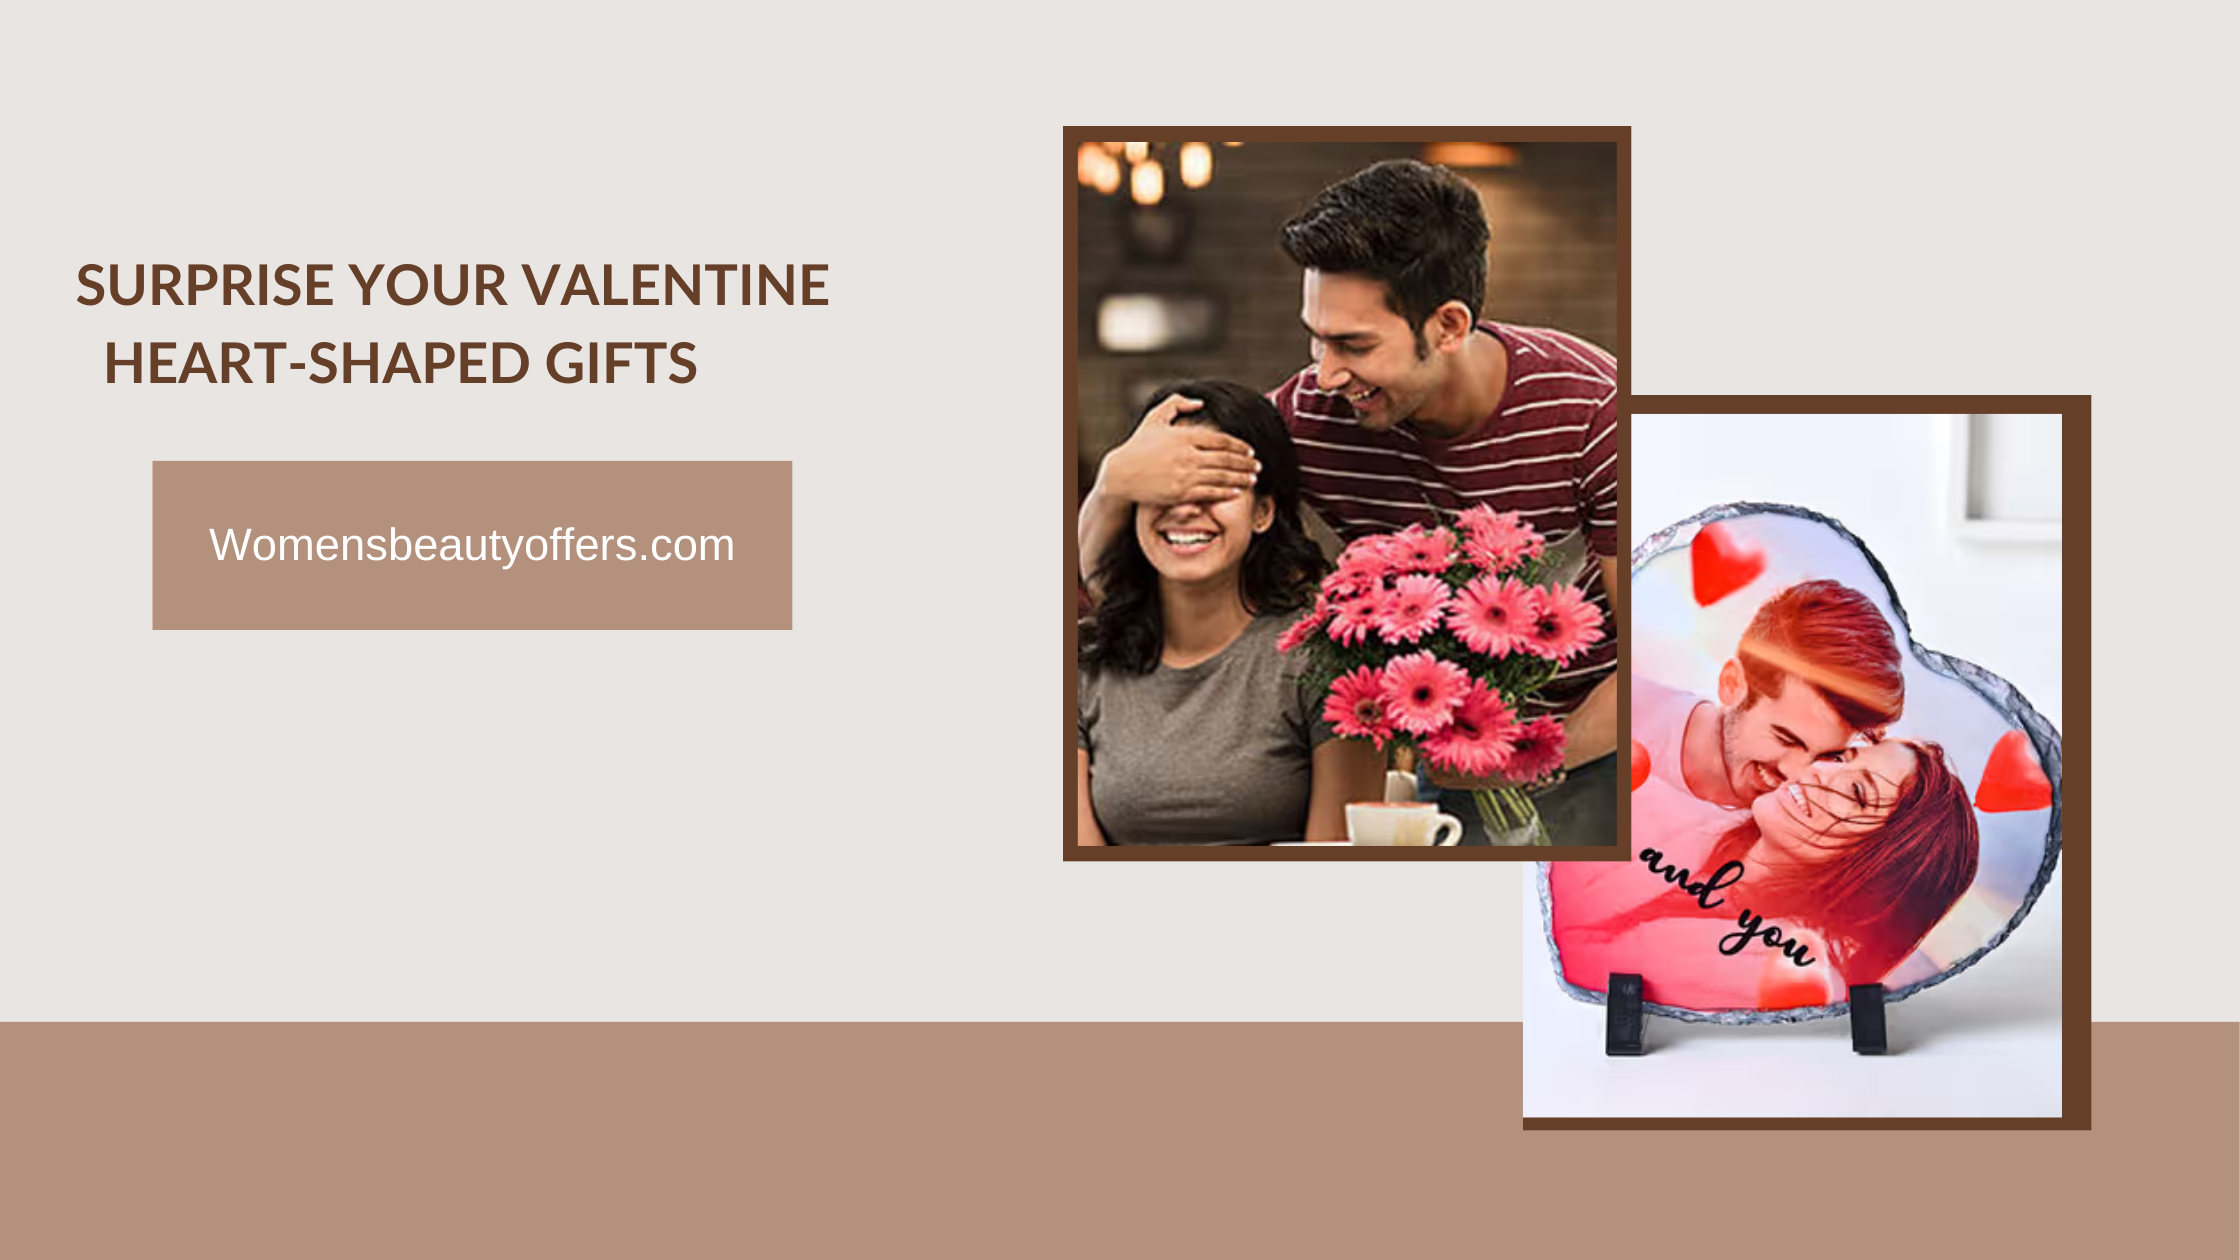 Surprise Your Valentine By Giving Heart-Shaped Gifts